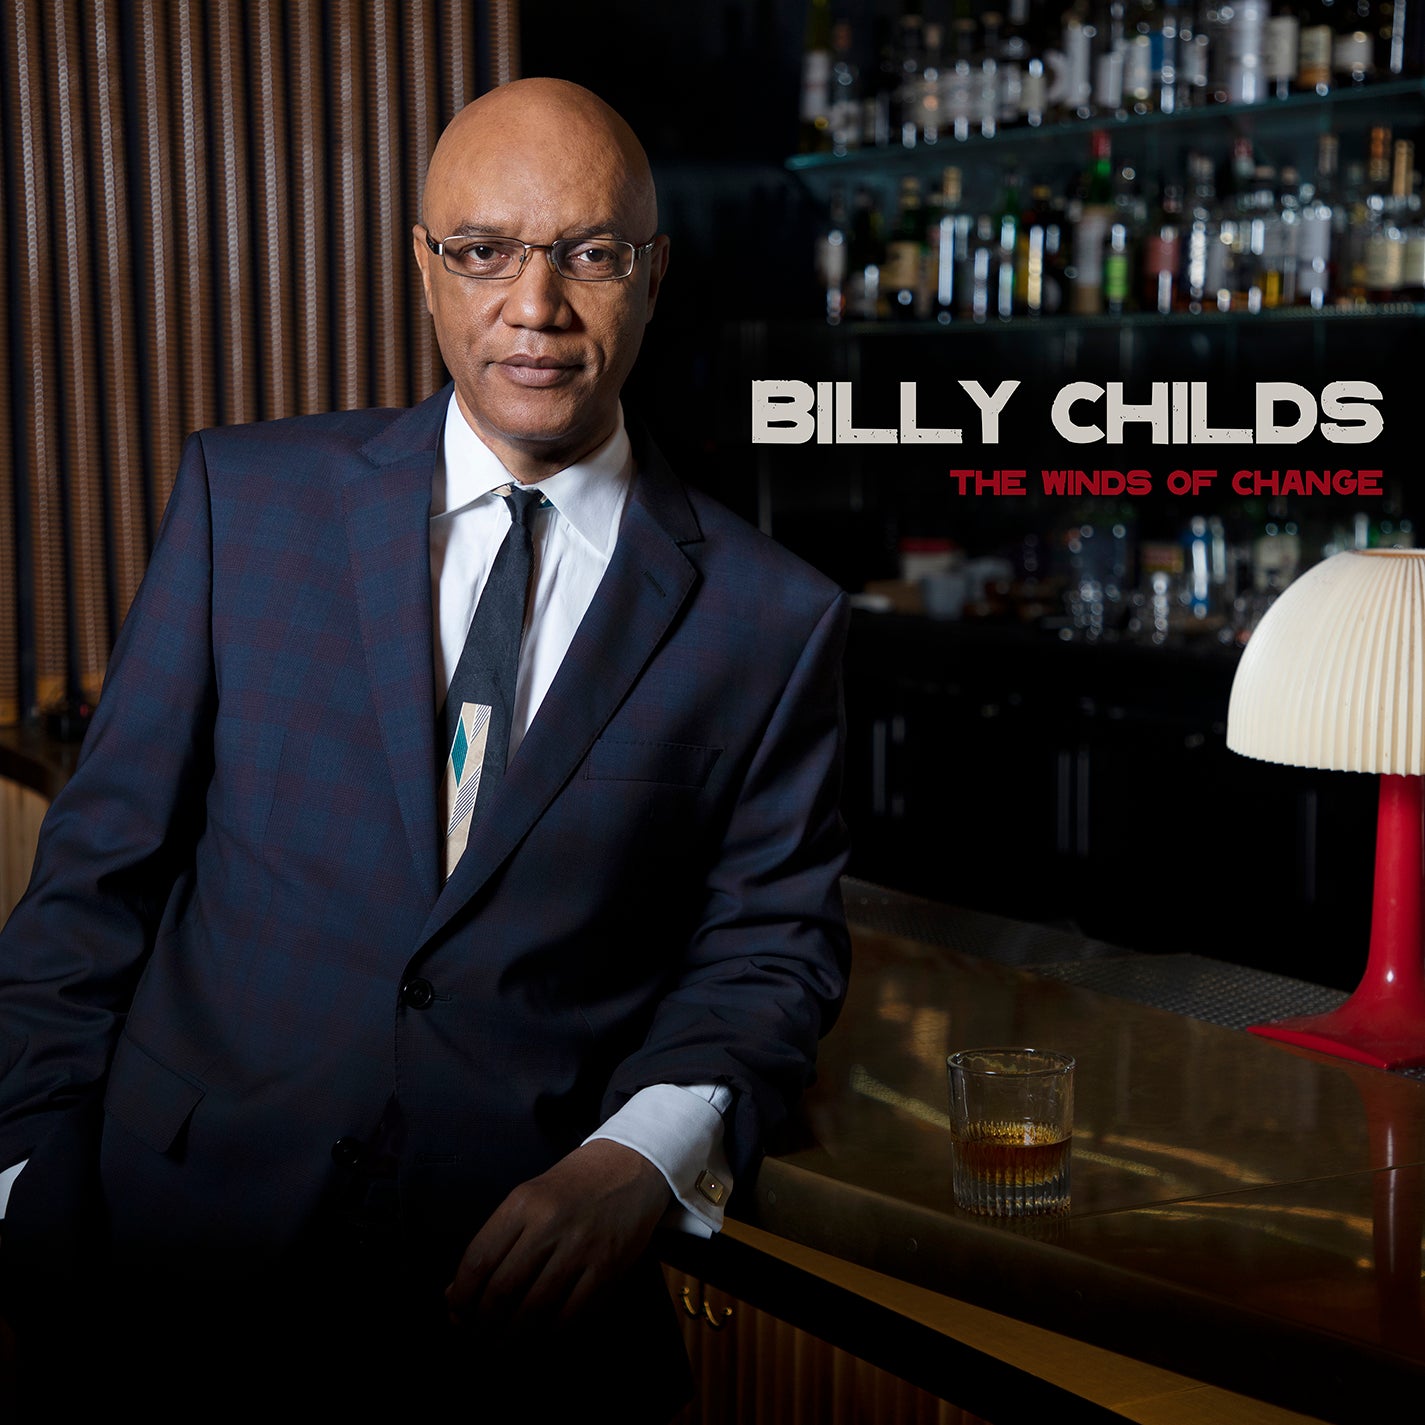 The Winds of Change / Billy Childs